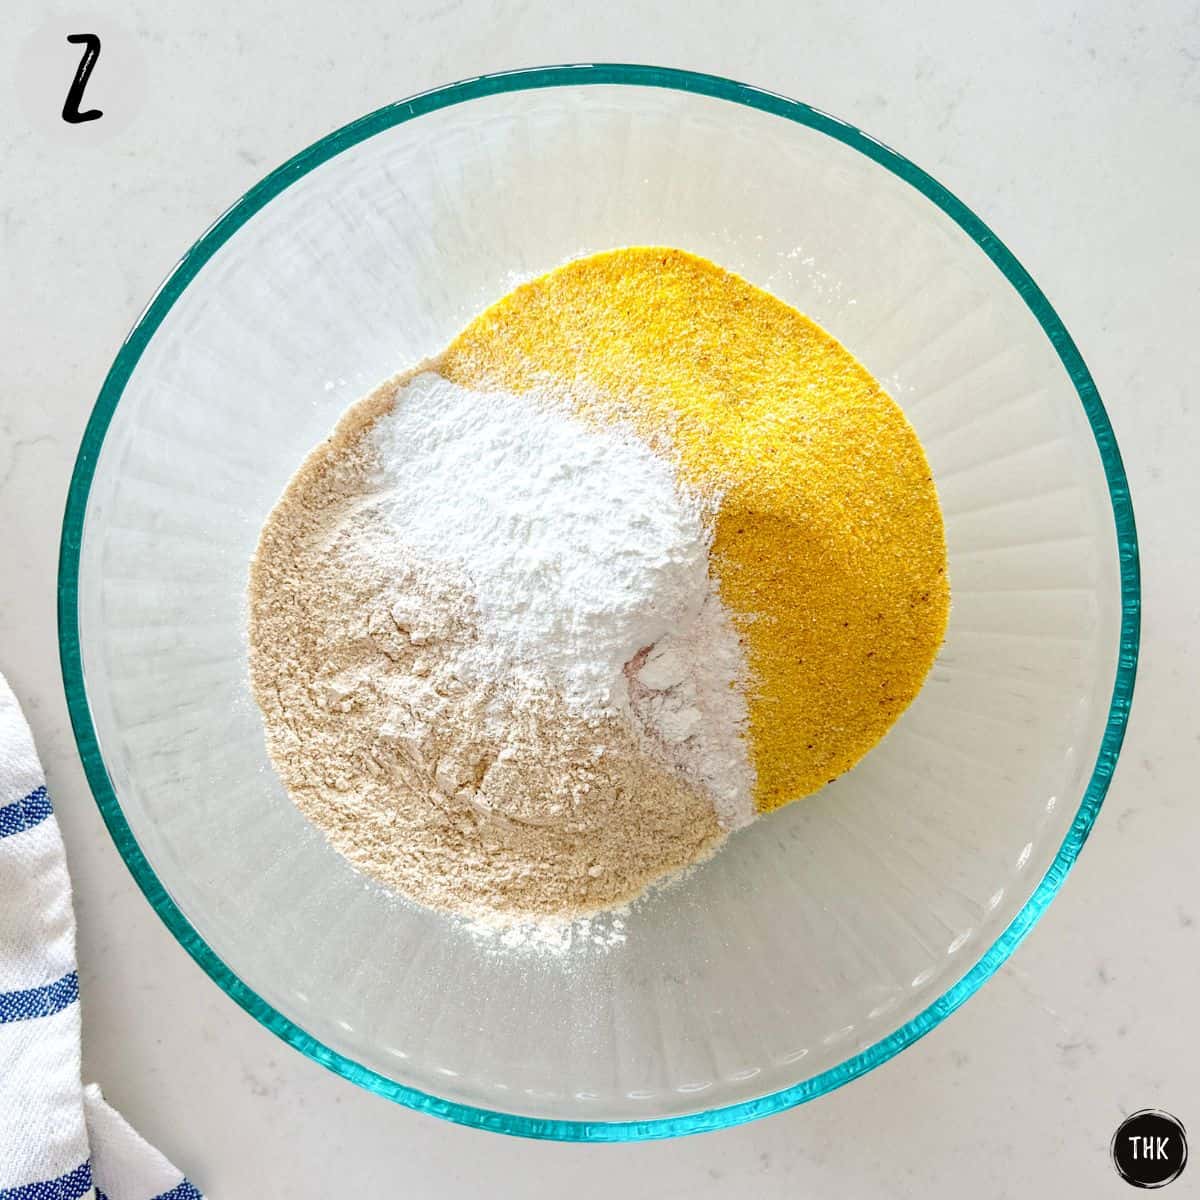 Mixing bowl with flour, baking powder, and cornmeal inside.